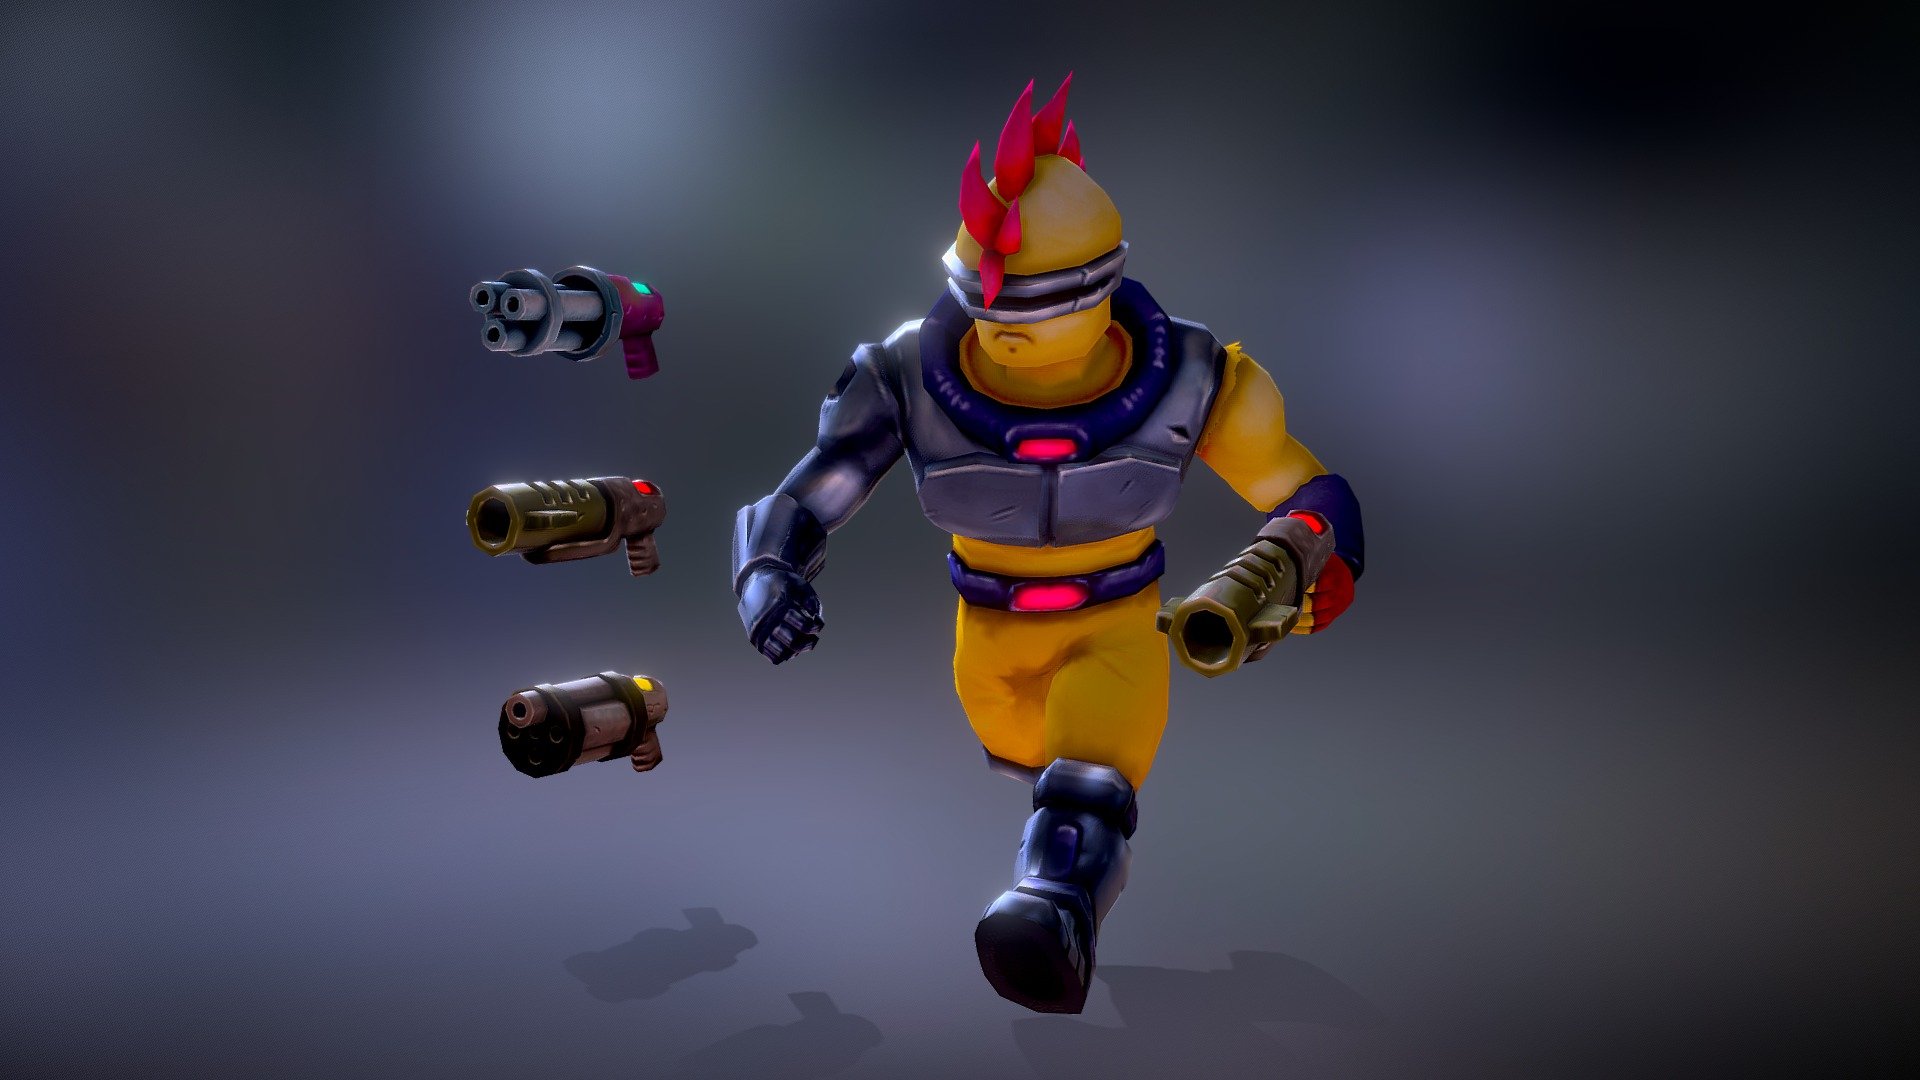 OC created for learning purposes early this year. Handpainted cartoonish character for futuristic 3D platform game.





Rigged and Animated Character: Gorogoro (3,358 tris) + 9 animation clips.




Weapons: Rocketlauncher (452 tris), Grenadelauncher (512 tris) and Machinegun (462 tris, separated in two meshes for animation purposes).



Gorogoro, please behave.

*Modeling, Animation, UVMaps &amp; Texturing were done using Blender 3d model